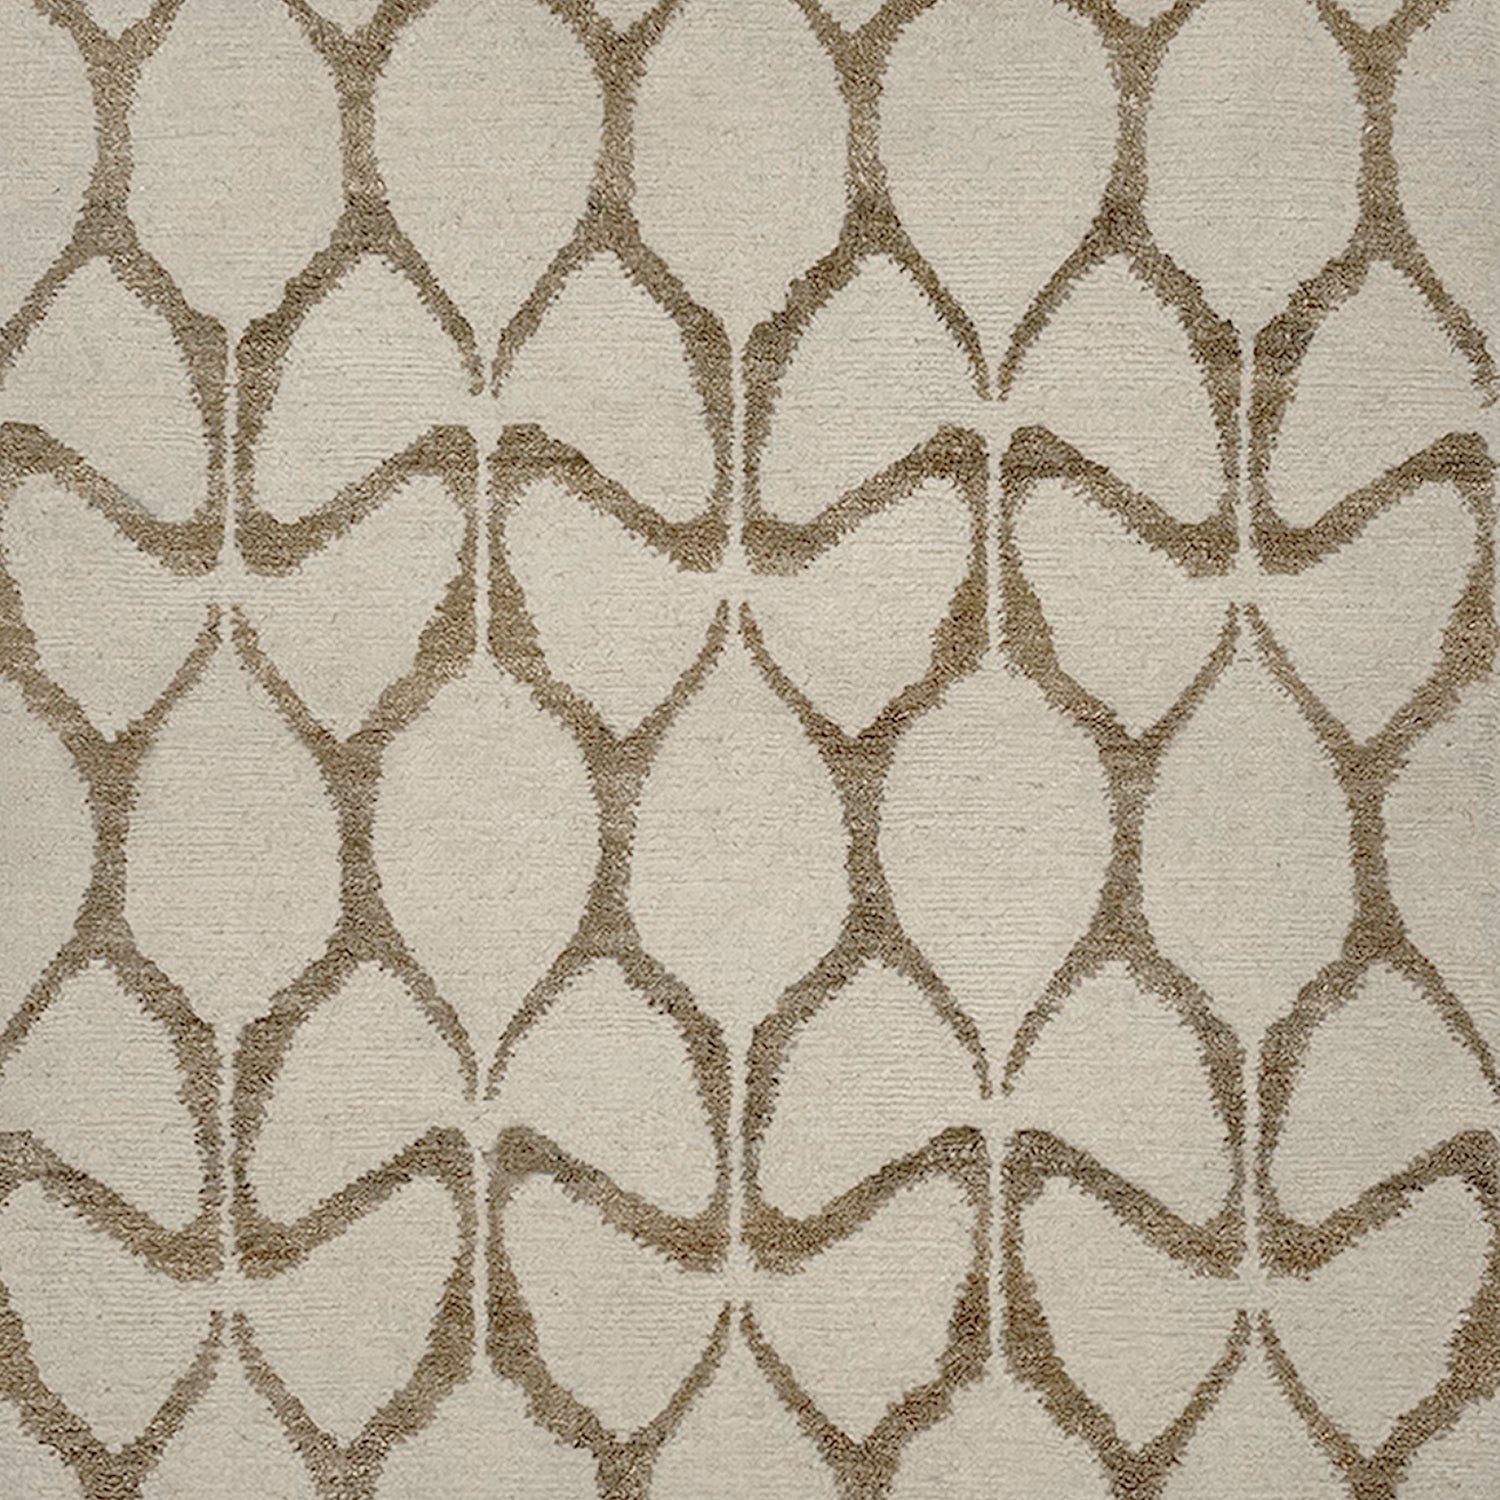 Woven high-pile rug swatch in an abstract curvolinear pattern in light brown on a cream field.